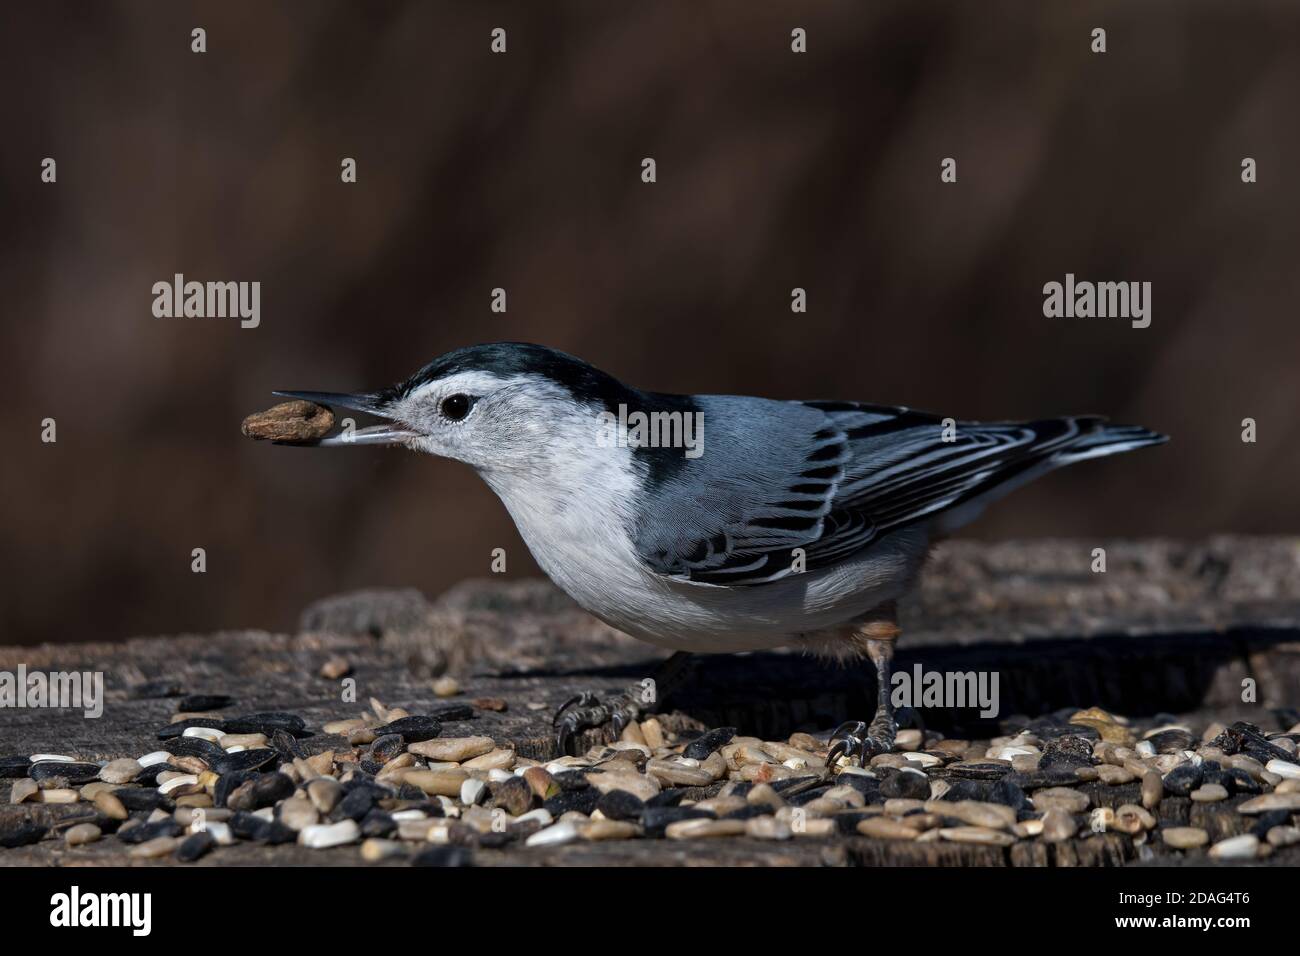 White-breasted nuthatch with seed while feeding on tree stump. It is a small songbird of the nuthatch family common across much of North America. Stock Photo